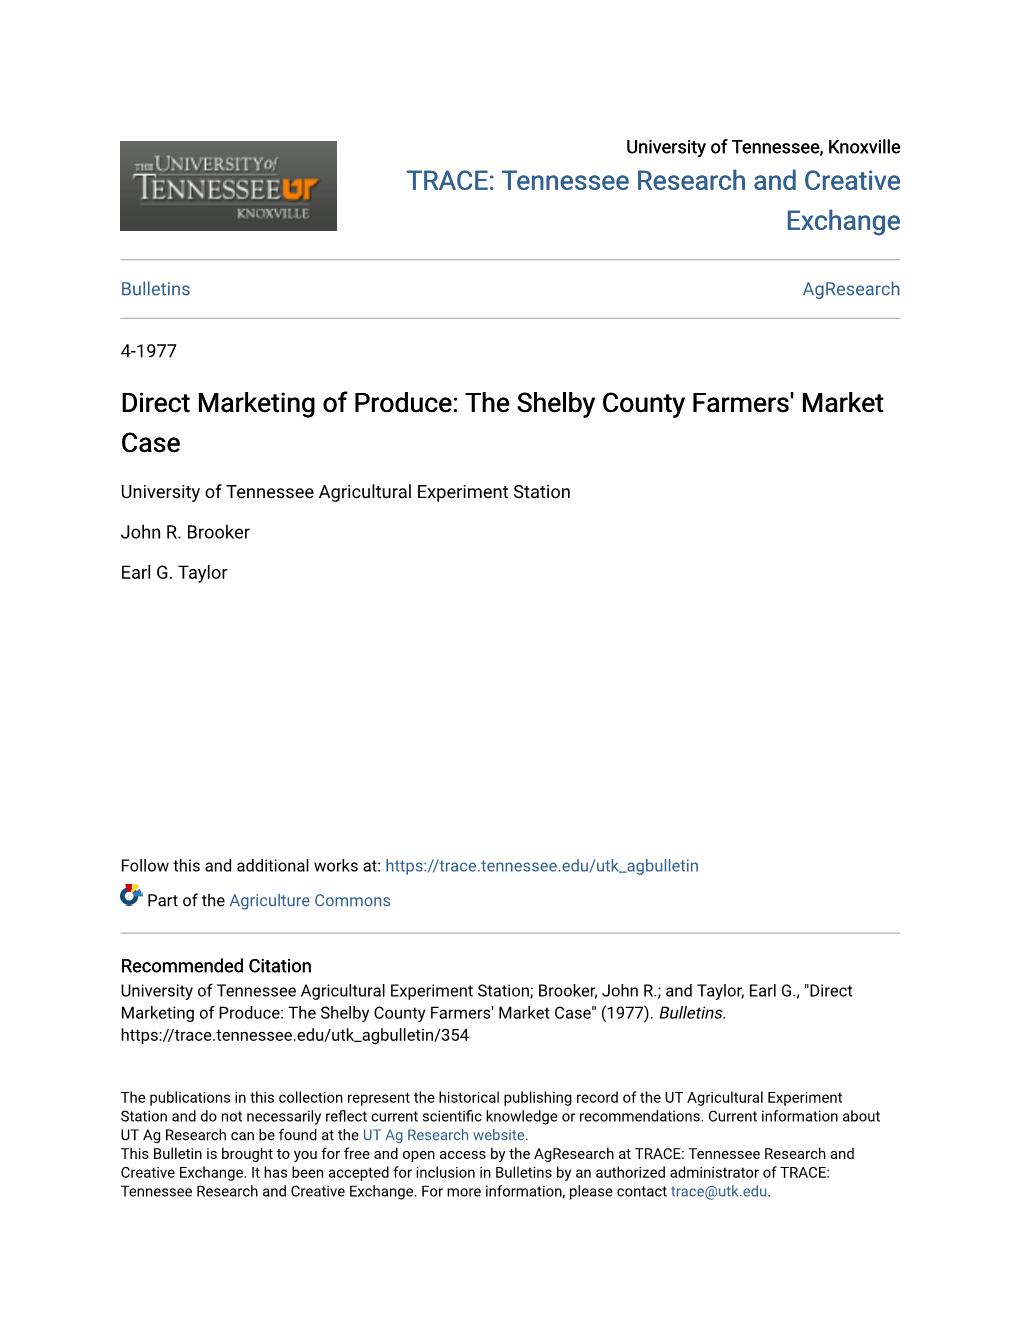 The Shelby County Farmers' Market Case